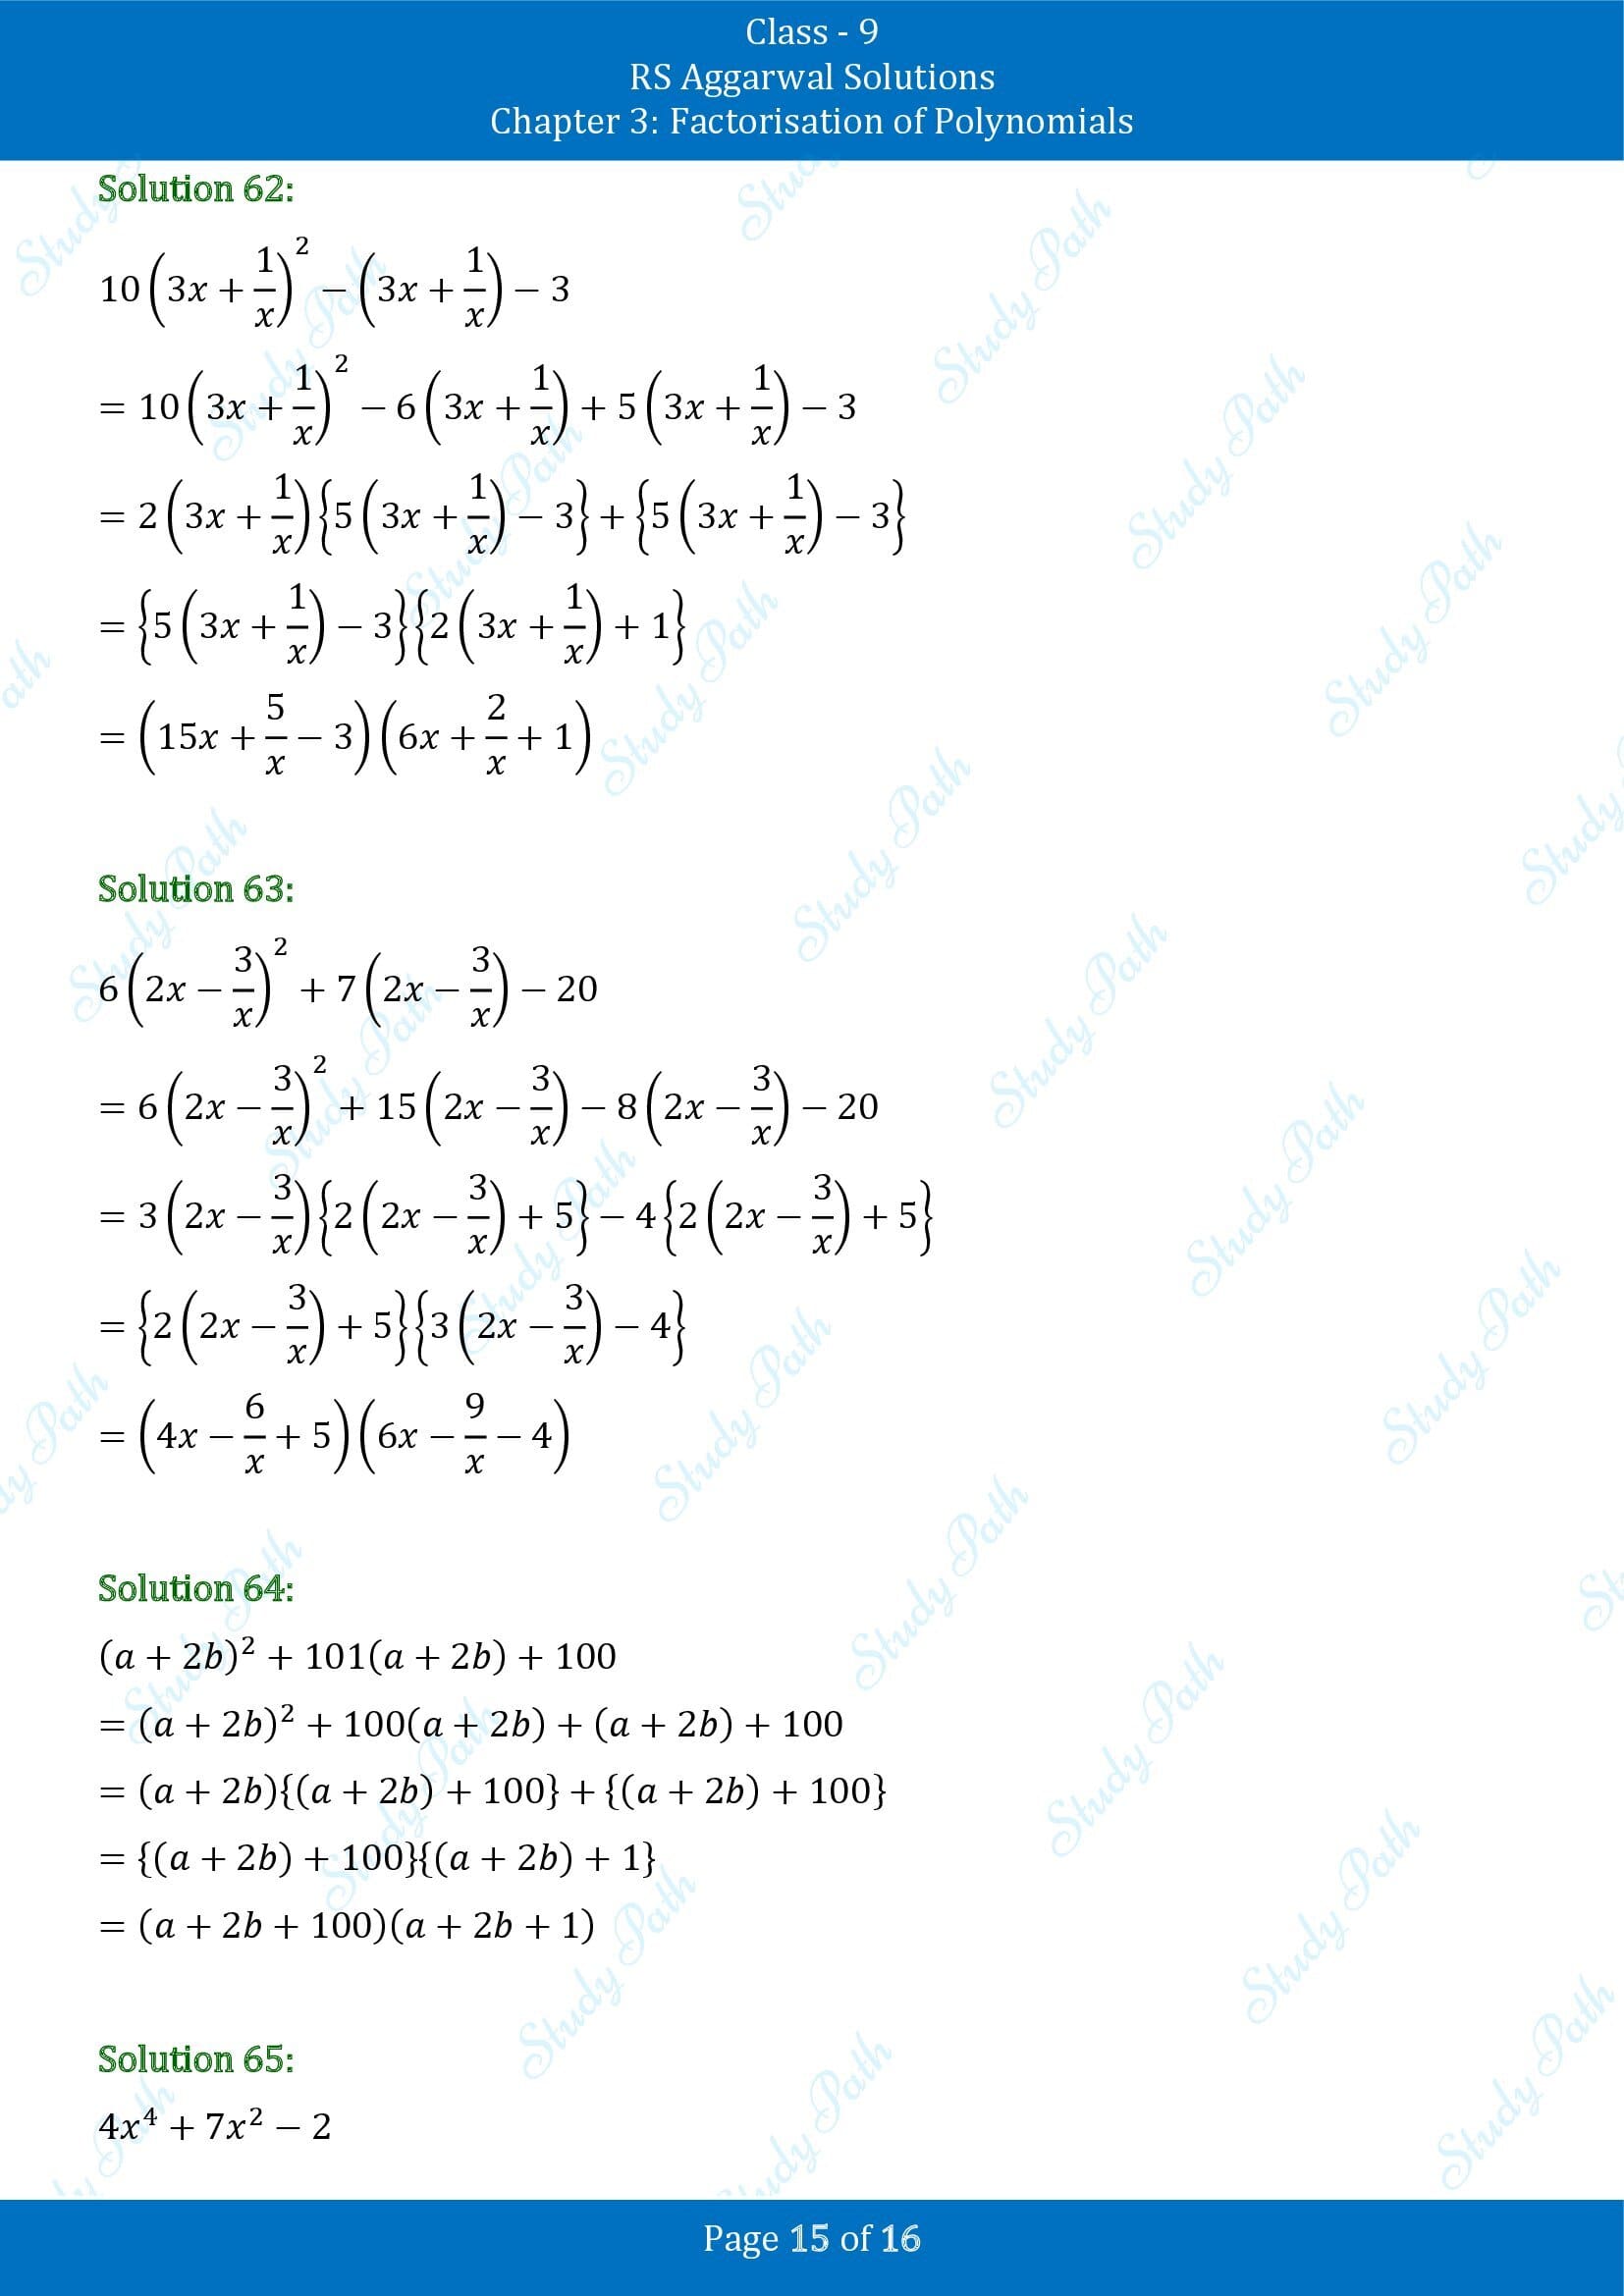 RS Aggarwal Solutions Class 9 Chapter 3 Factorisation of Polynomials Exercise 3C 00015